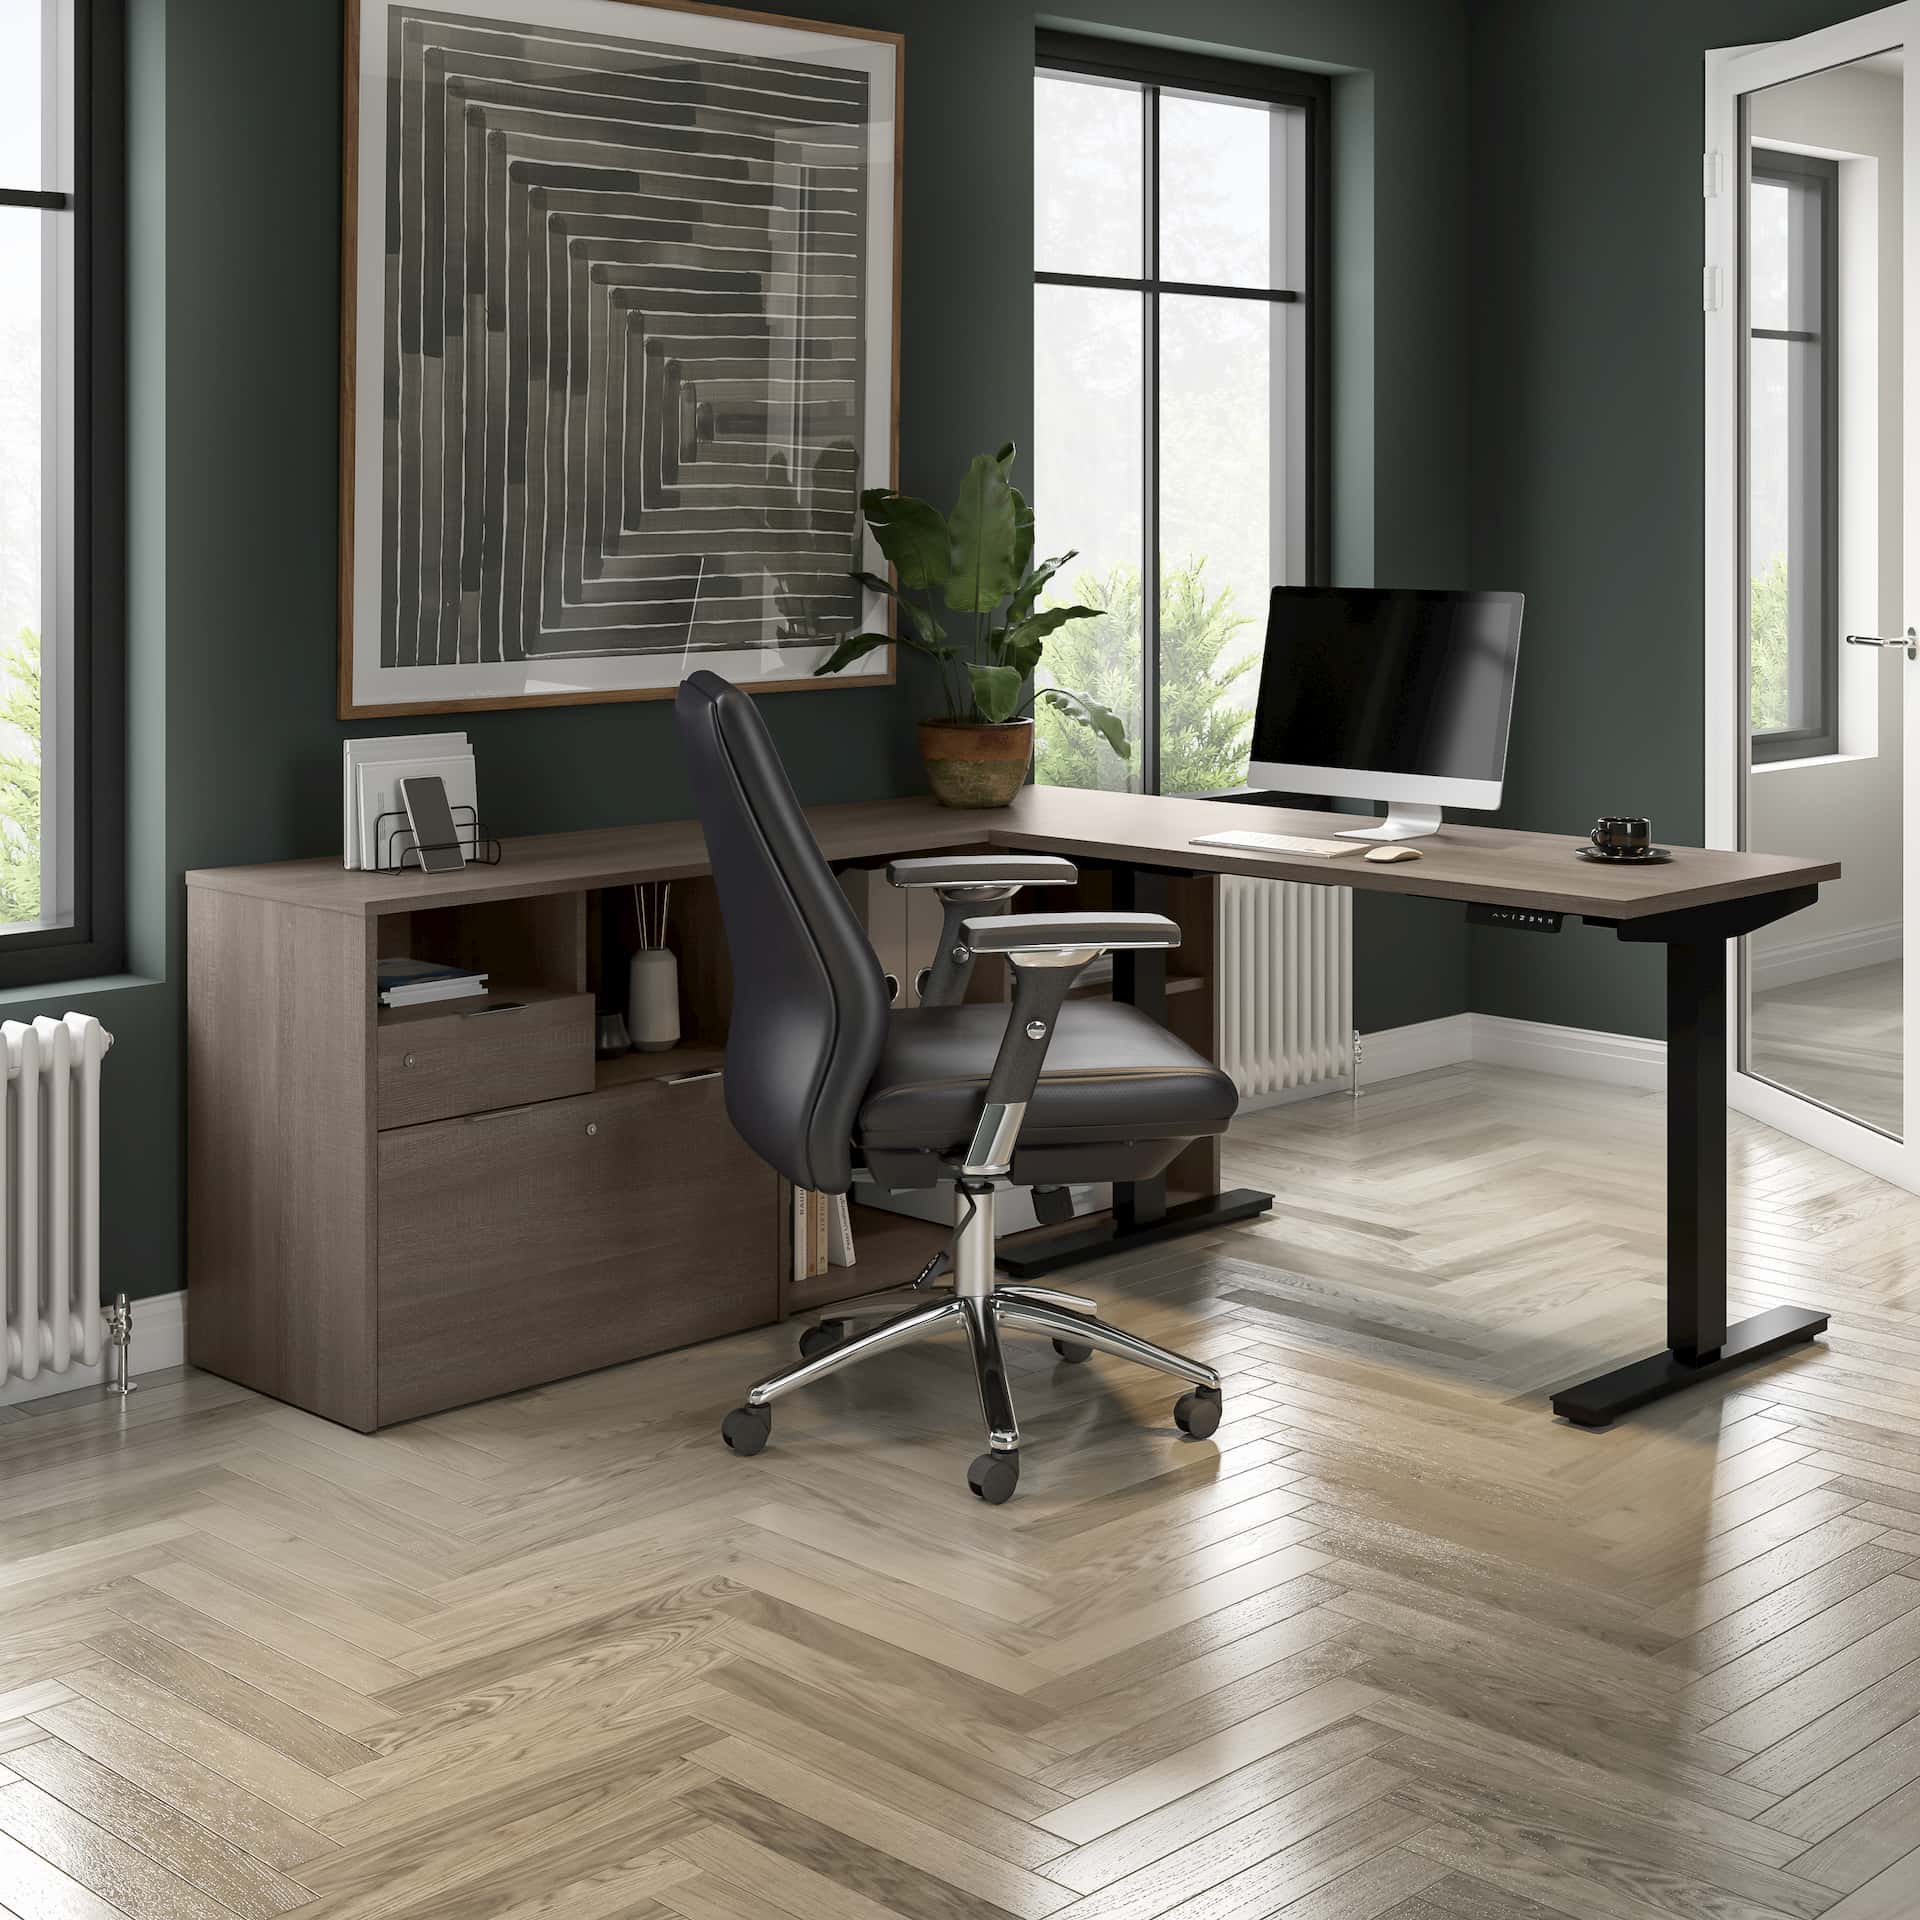 Beyond Standard Desk Height – Options to Enhance Comfort and Productivity at Work